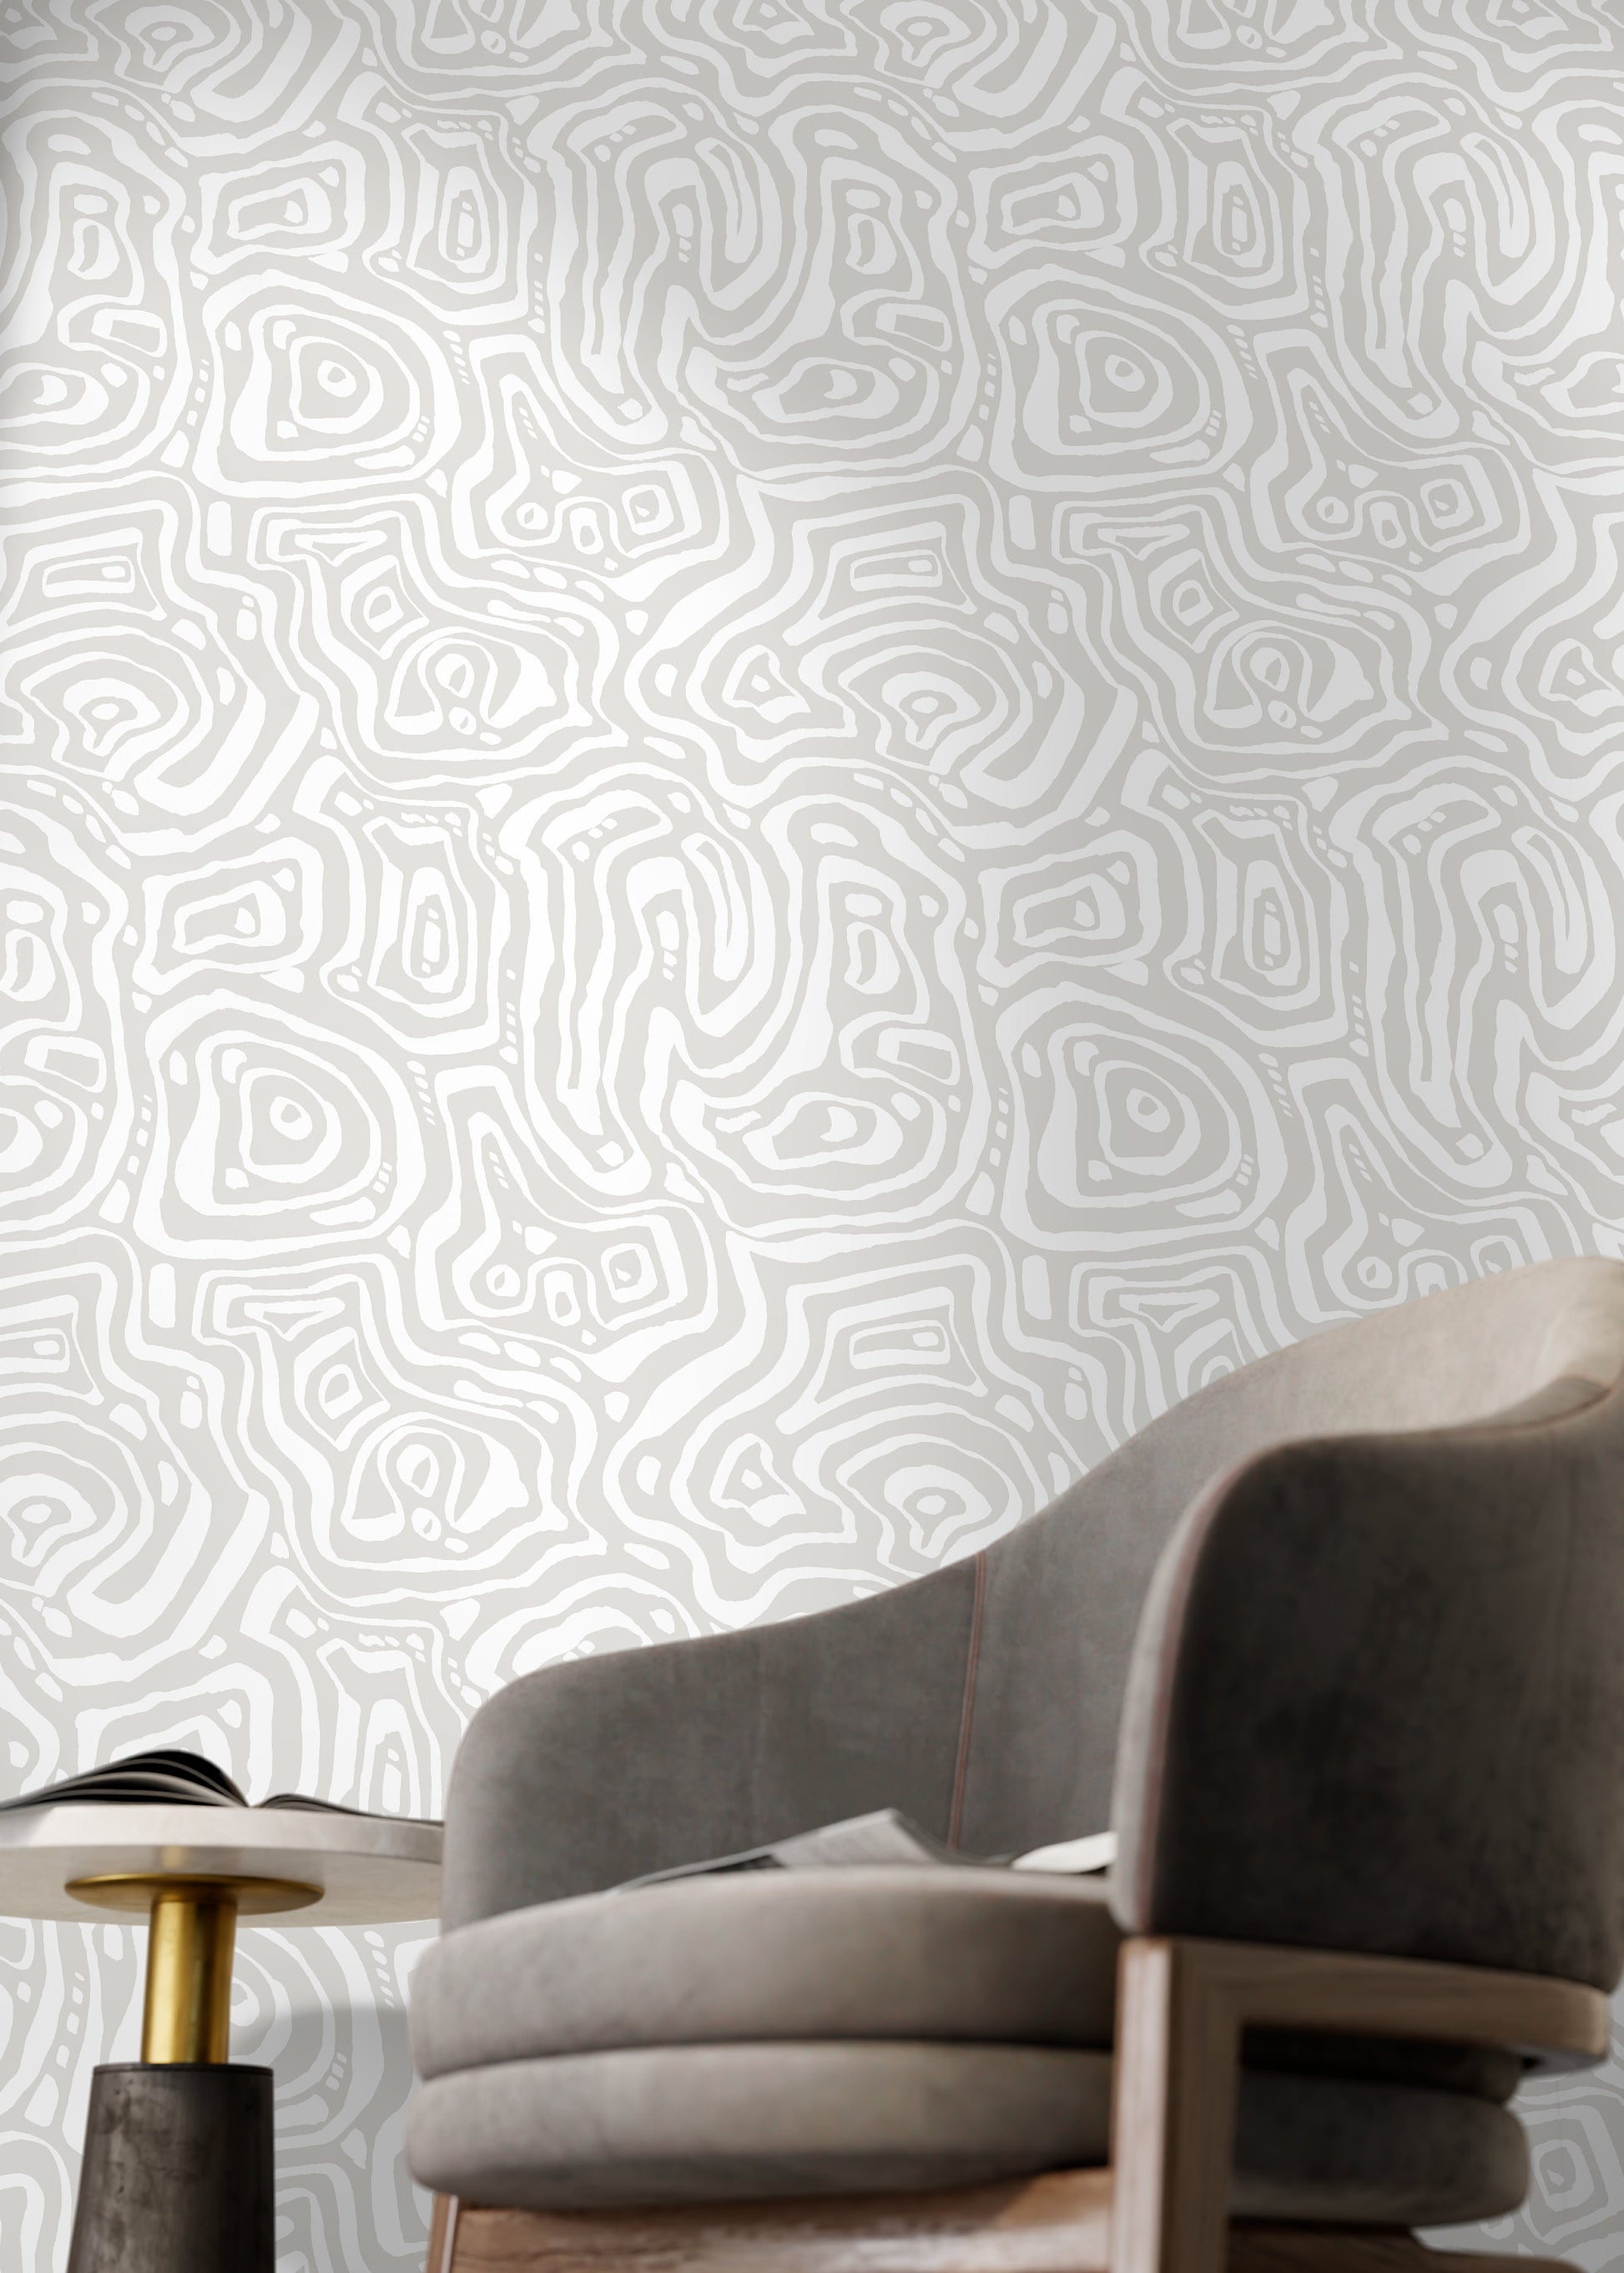 Gray Abstract Lines Wallpaper / Peel and Stick Wallpaper Removable Wallpaper Home Decor Wall Art Wall Decor Room Decor - C655